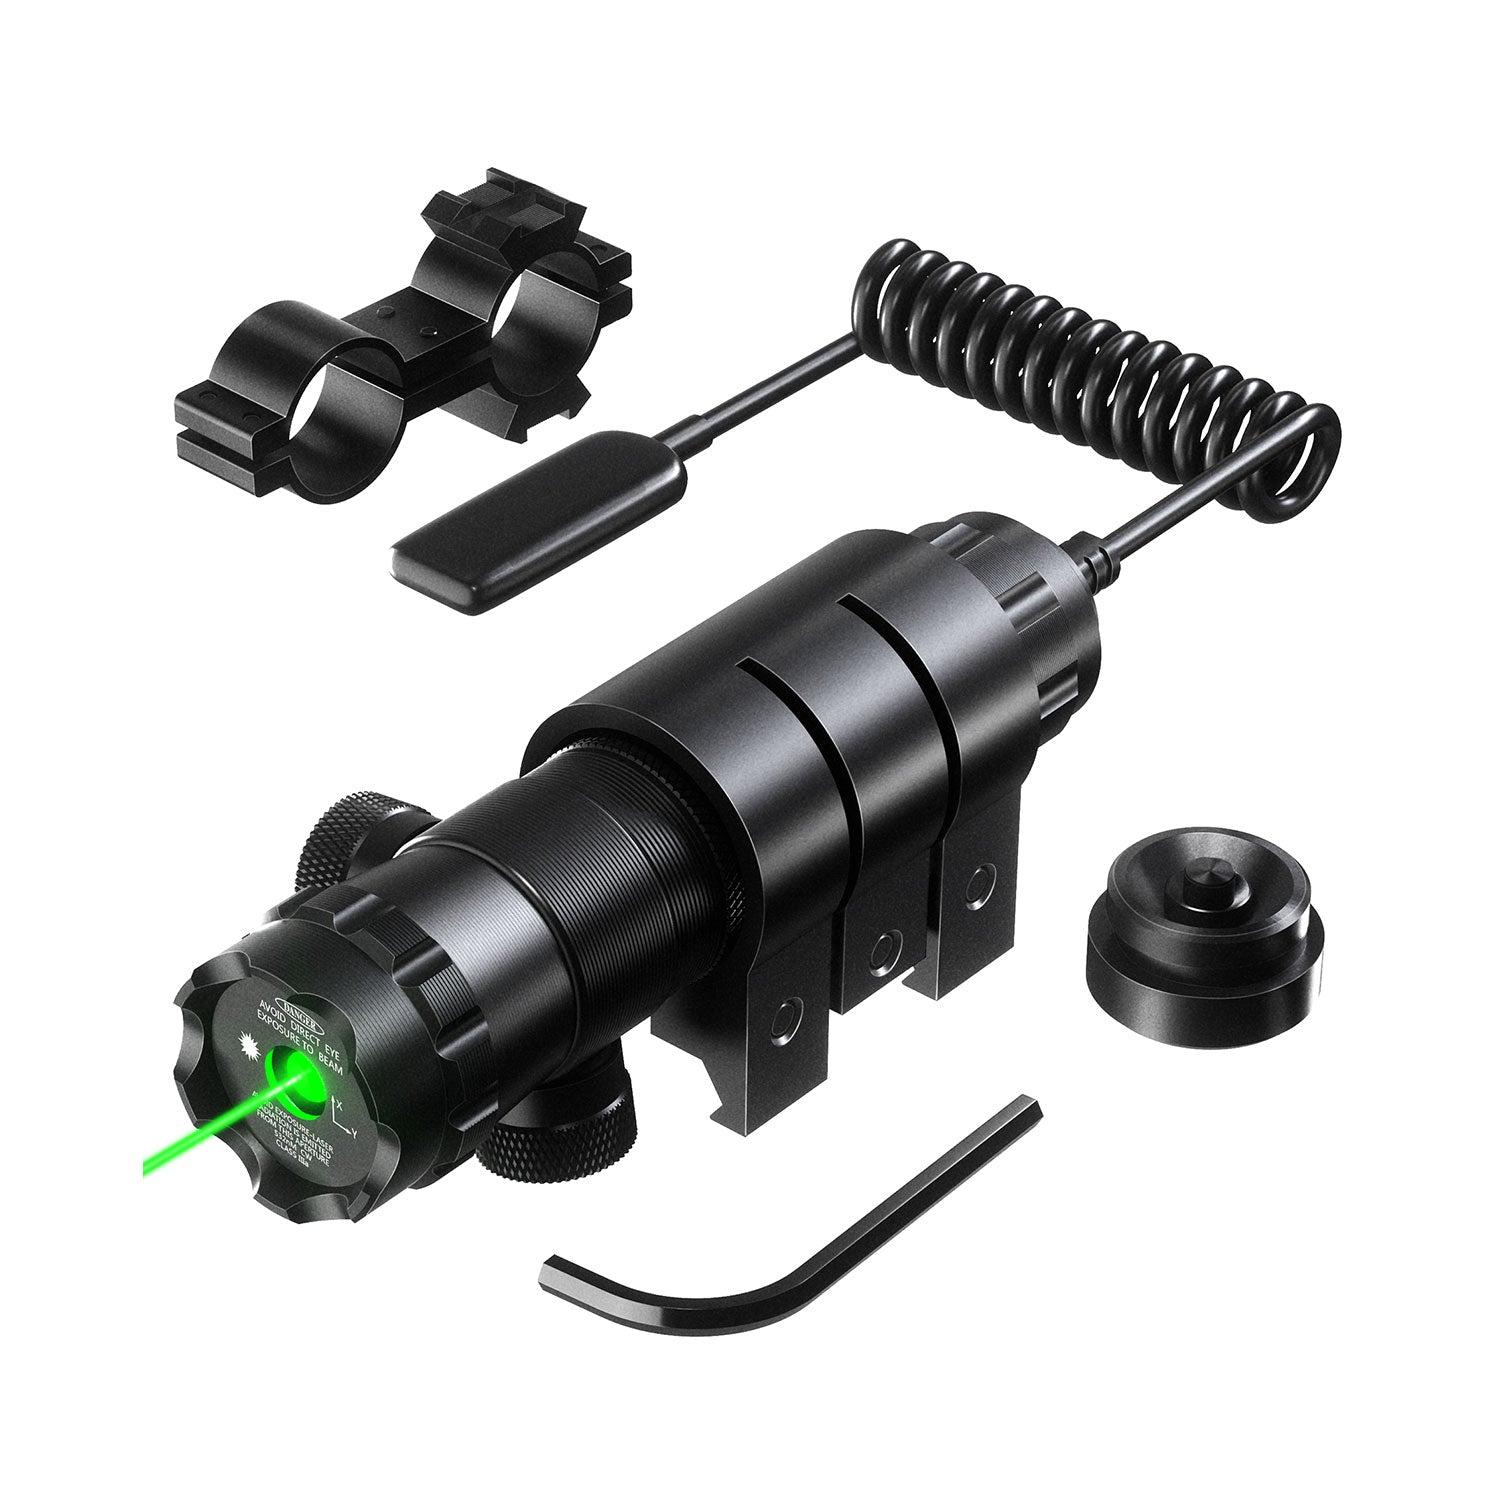 Green Laser Sight with Adjustable Mount